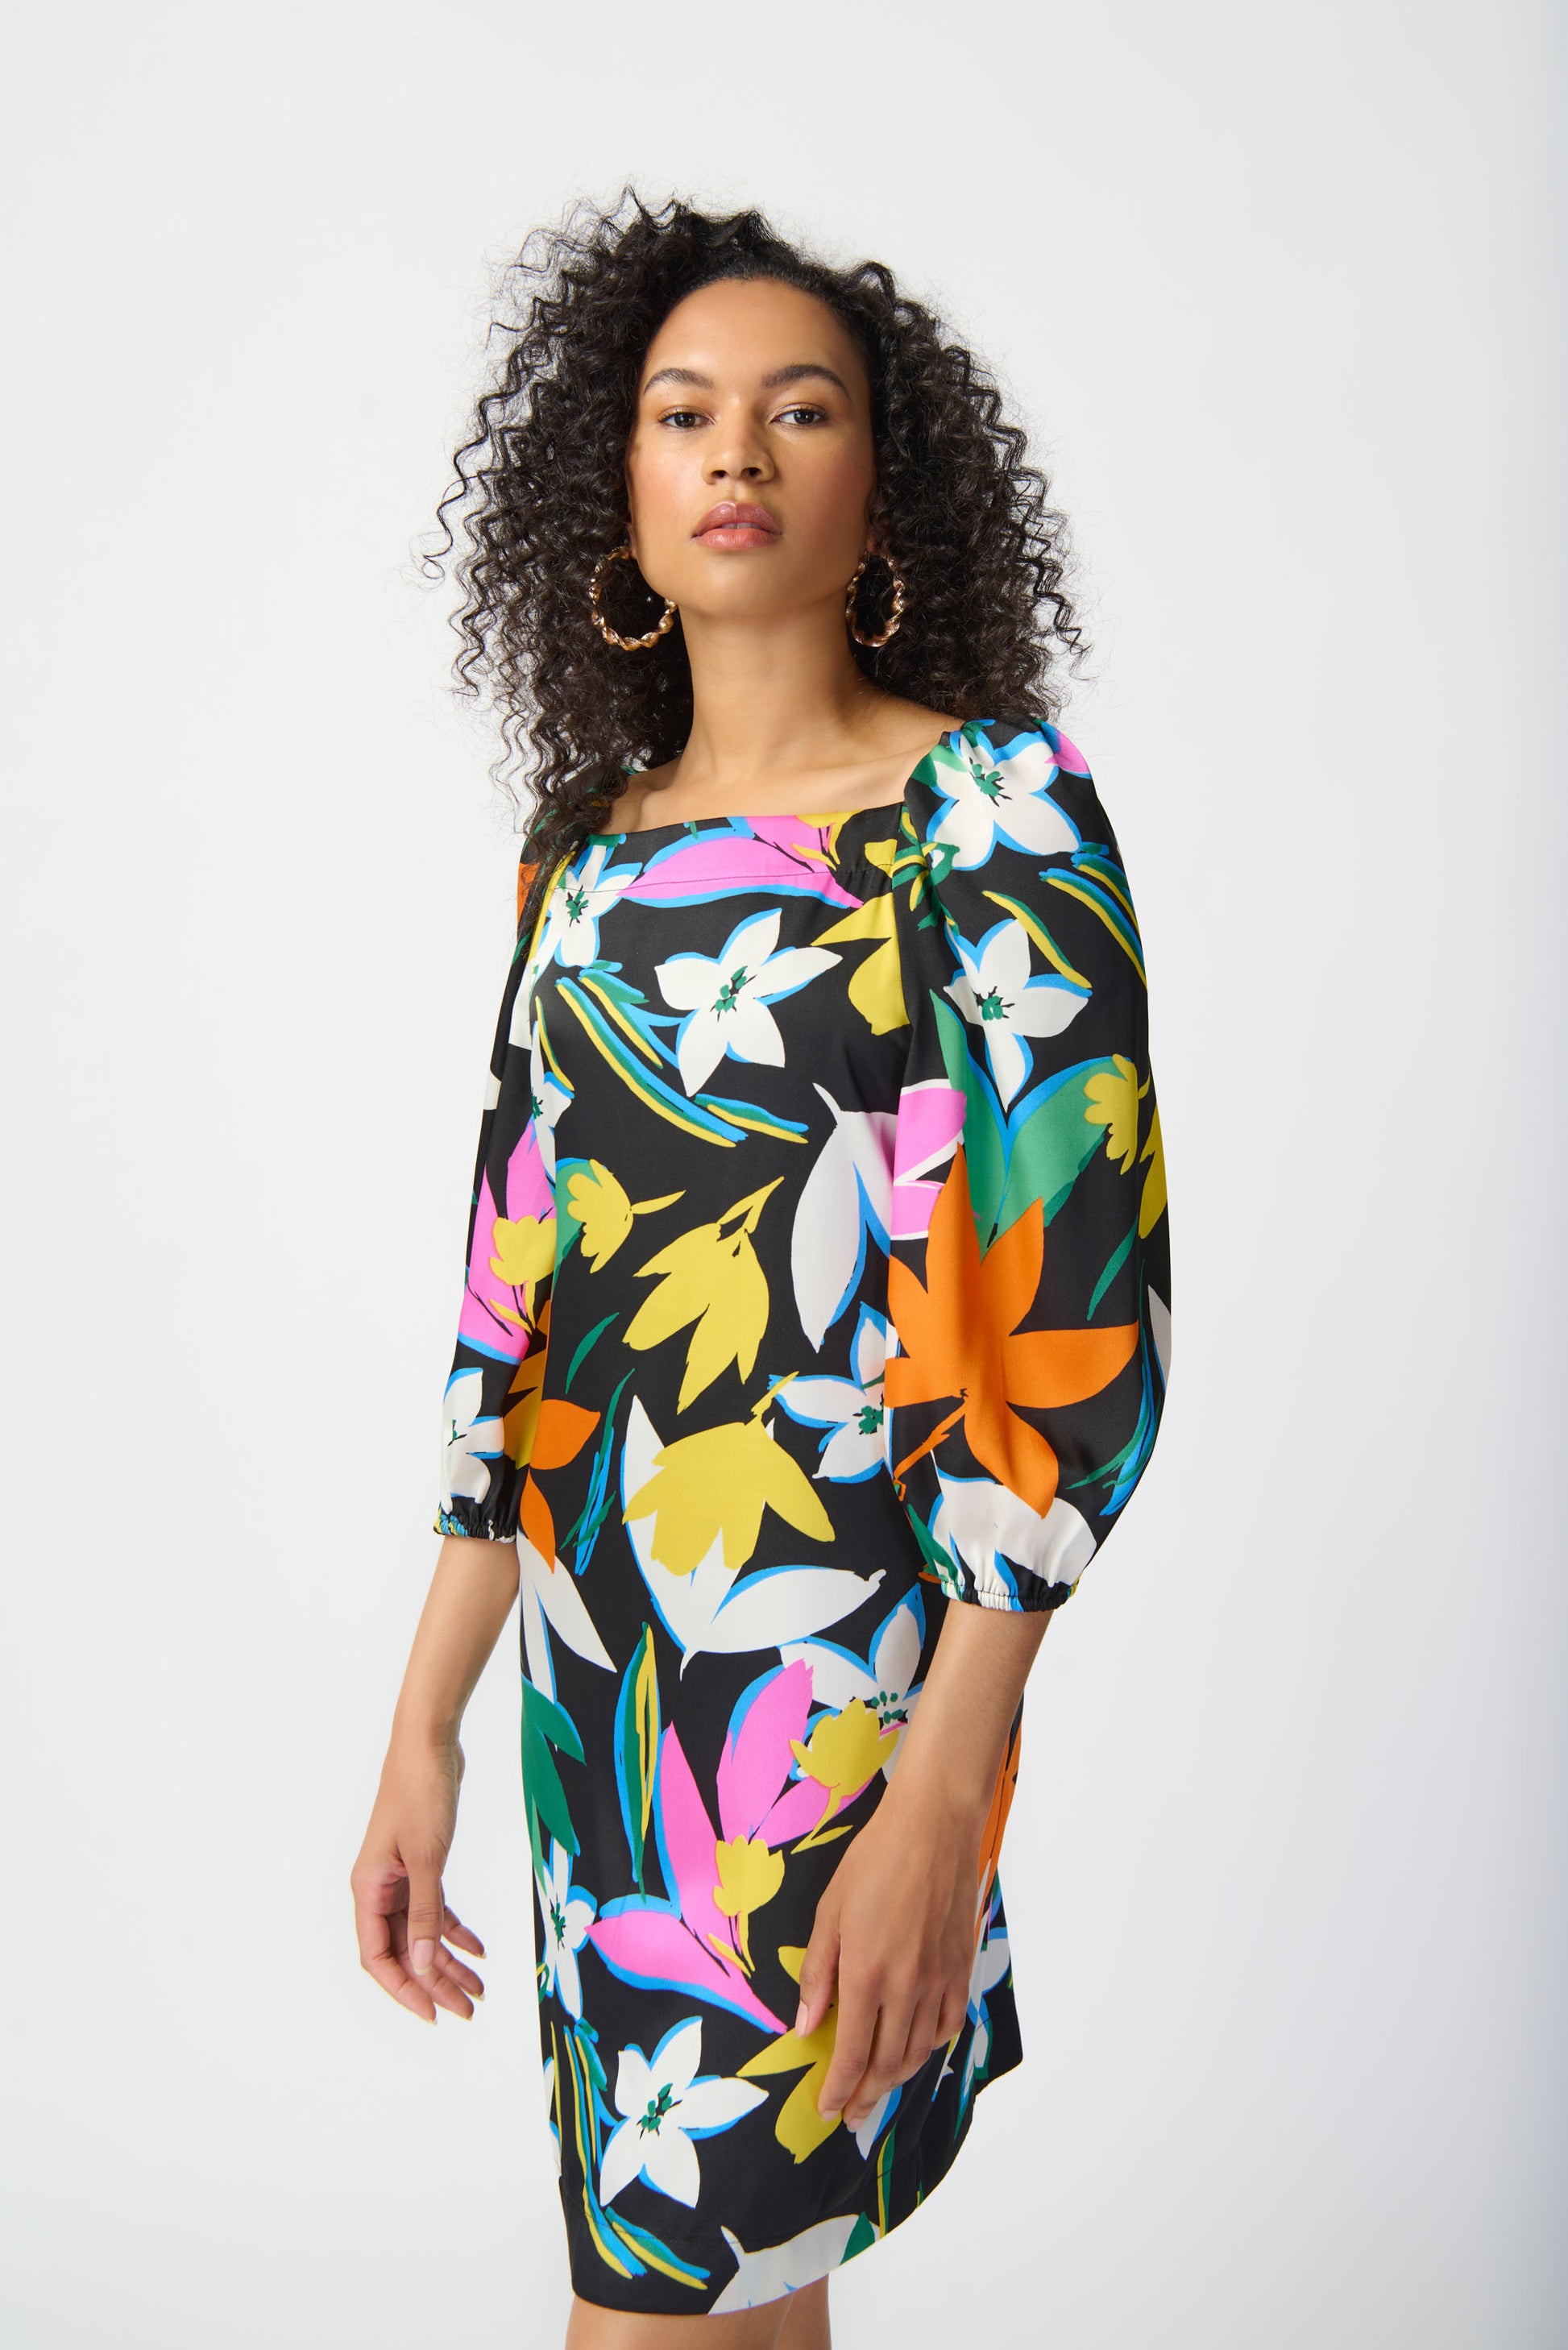 Joseph Ribkoff long-sleeved satin dress, colorful floral print. Square neckline, puff sleeves. Women's spring dress. Spring collection. Women's boutique. Mackinac Island